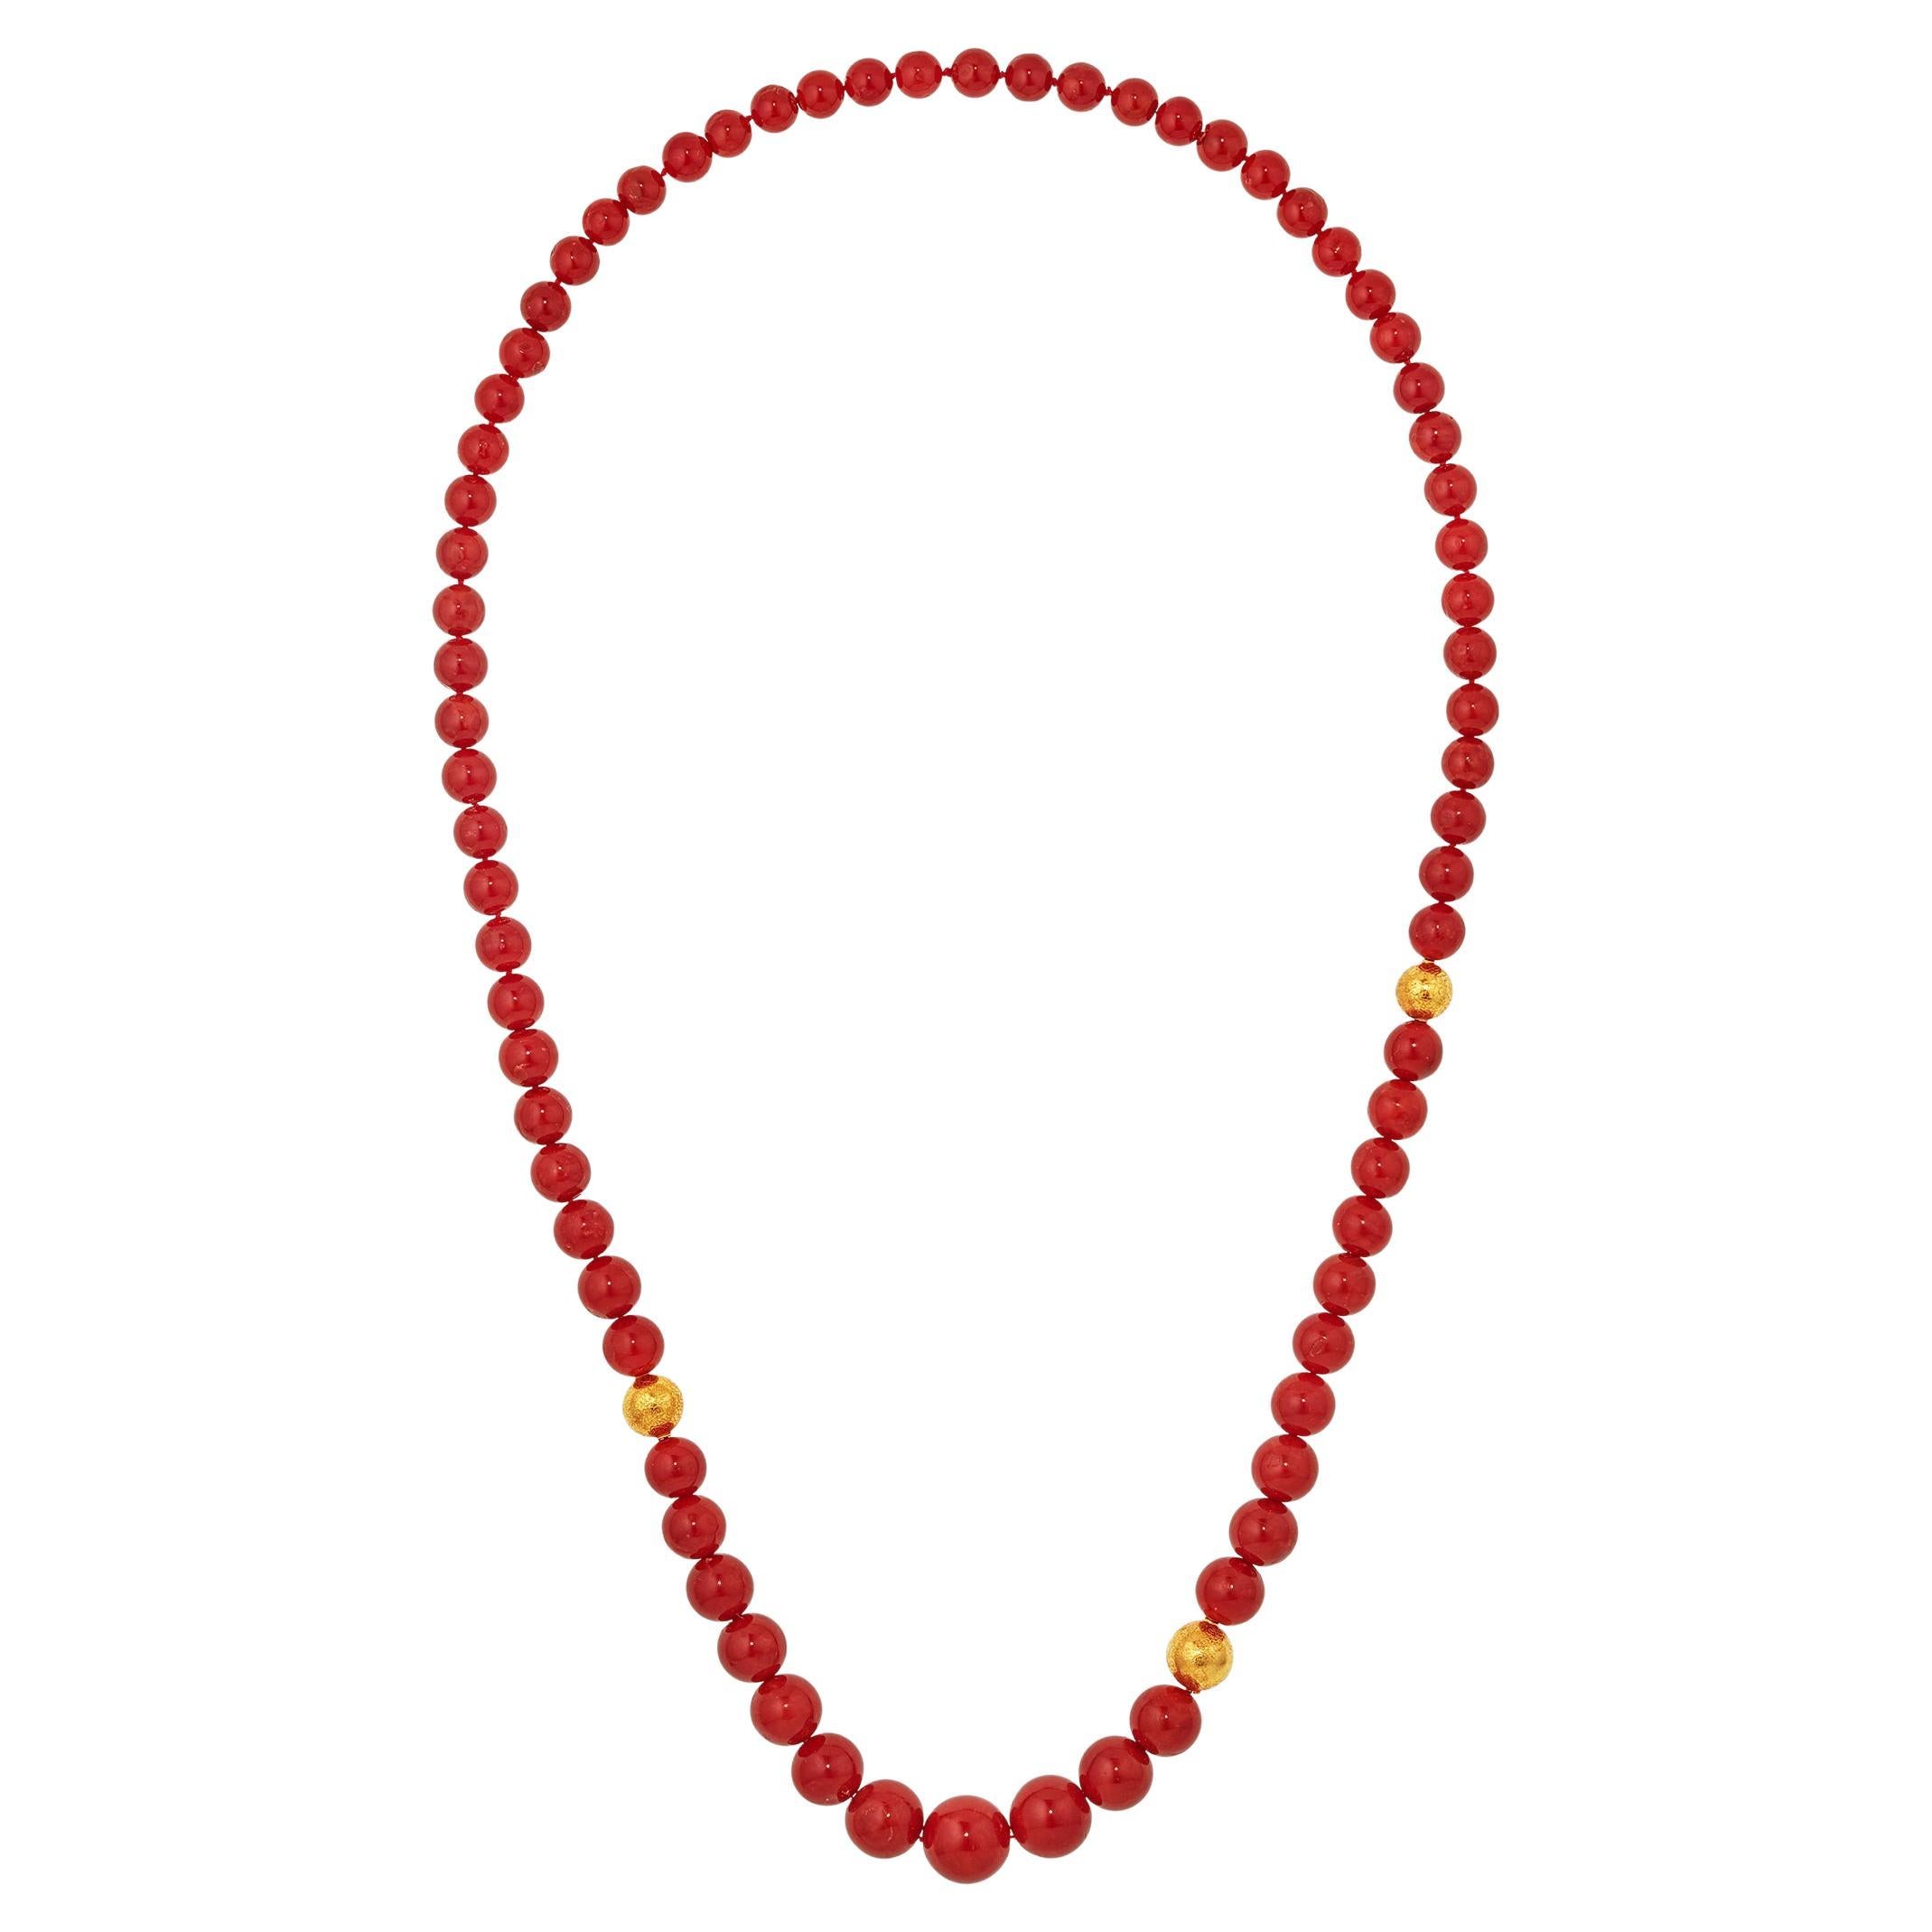 GIA Italian Oxblood Round Bead Coral Necklace with 18 Karat Yellow Gold Accents